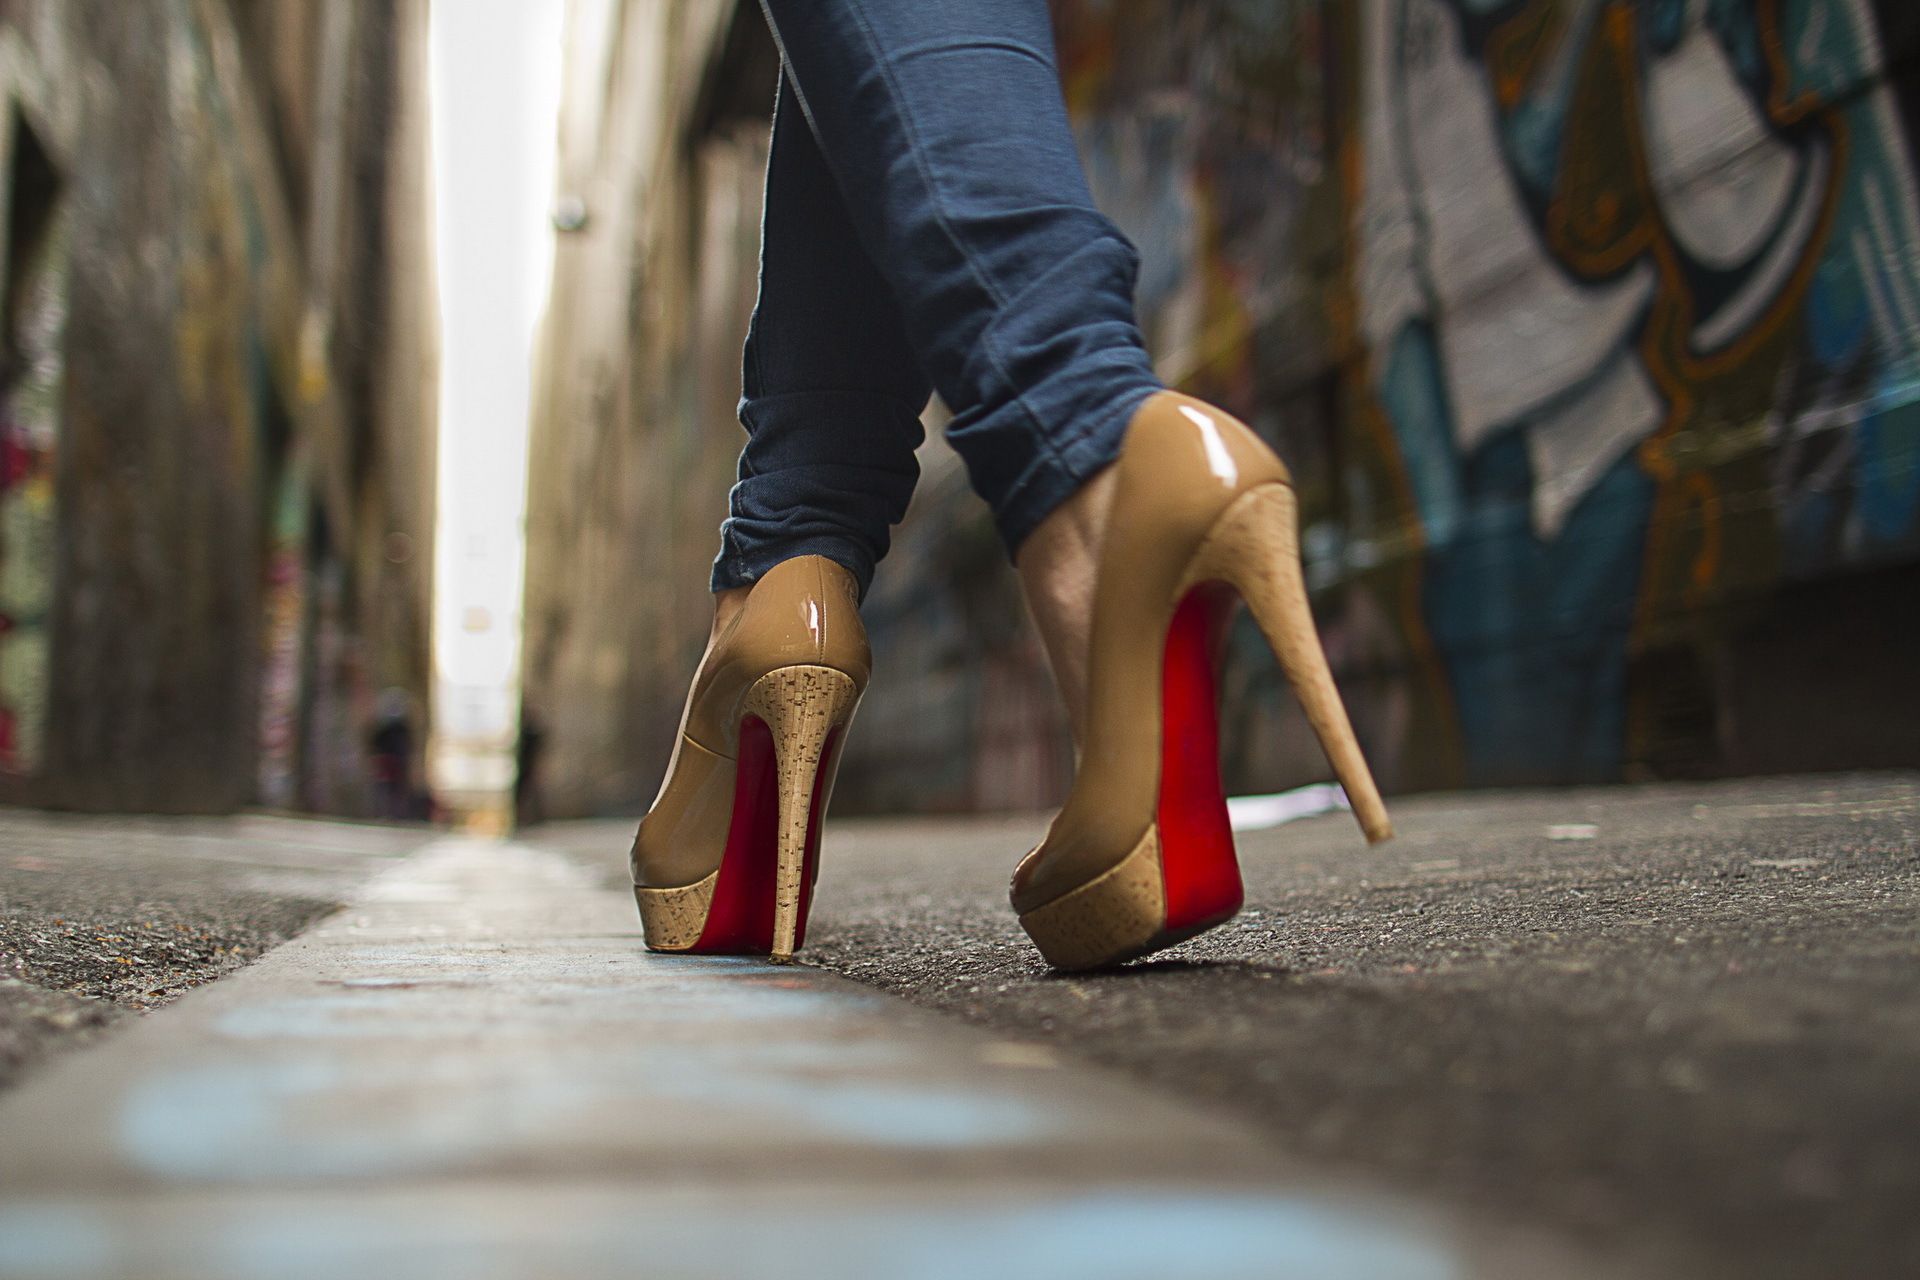 A person wearing high heels photo – Free Journal Image on Unsplash